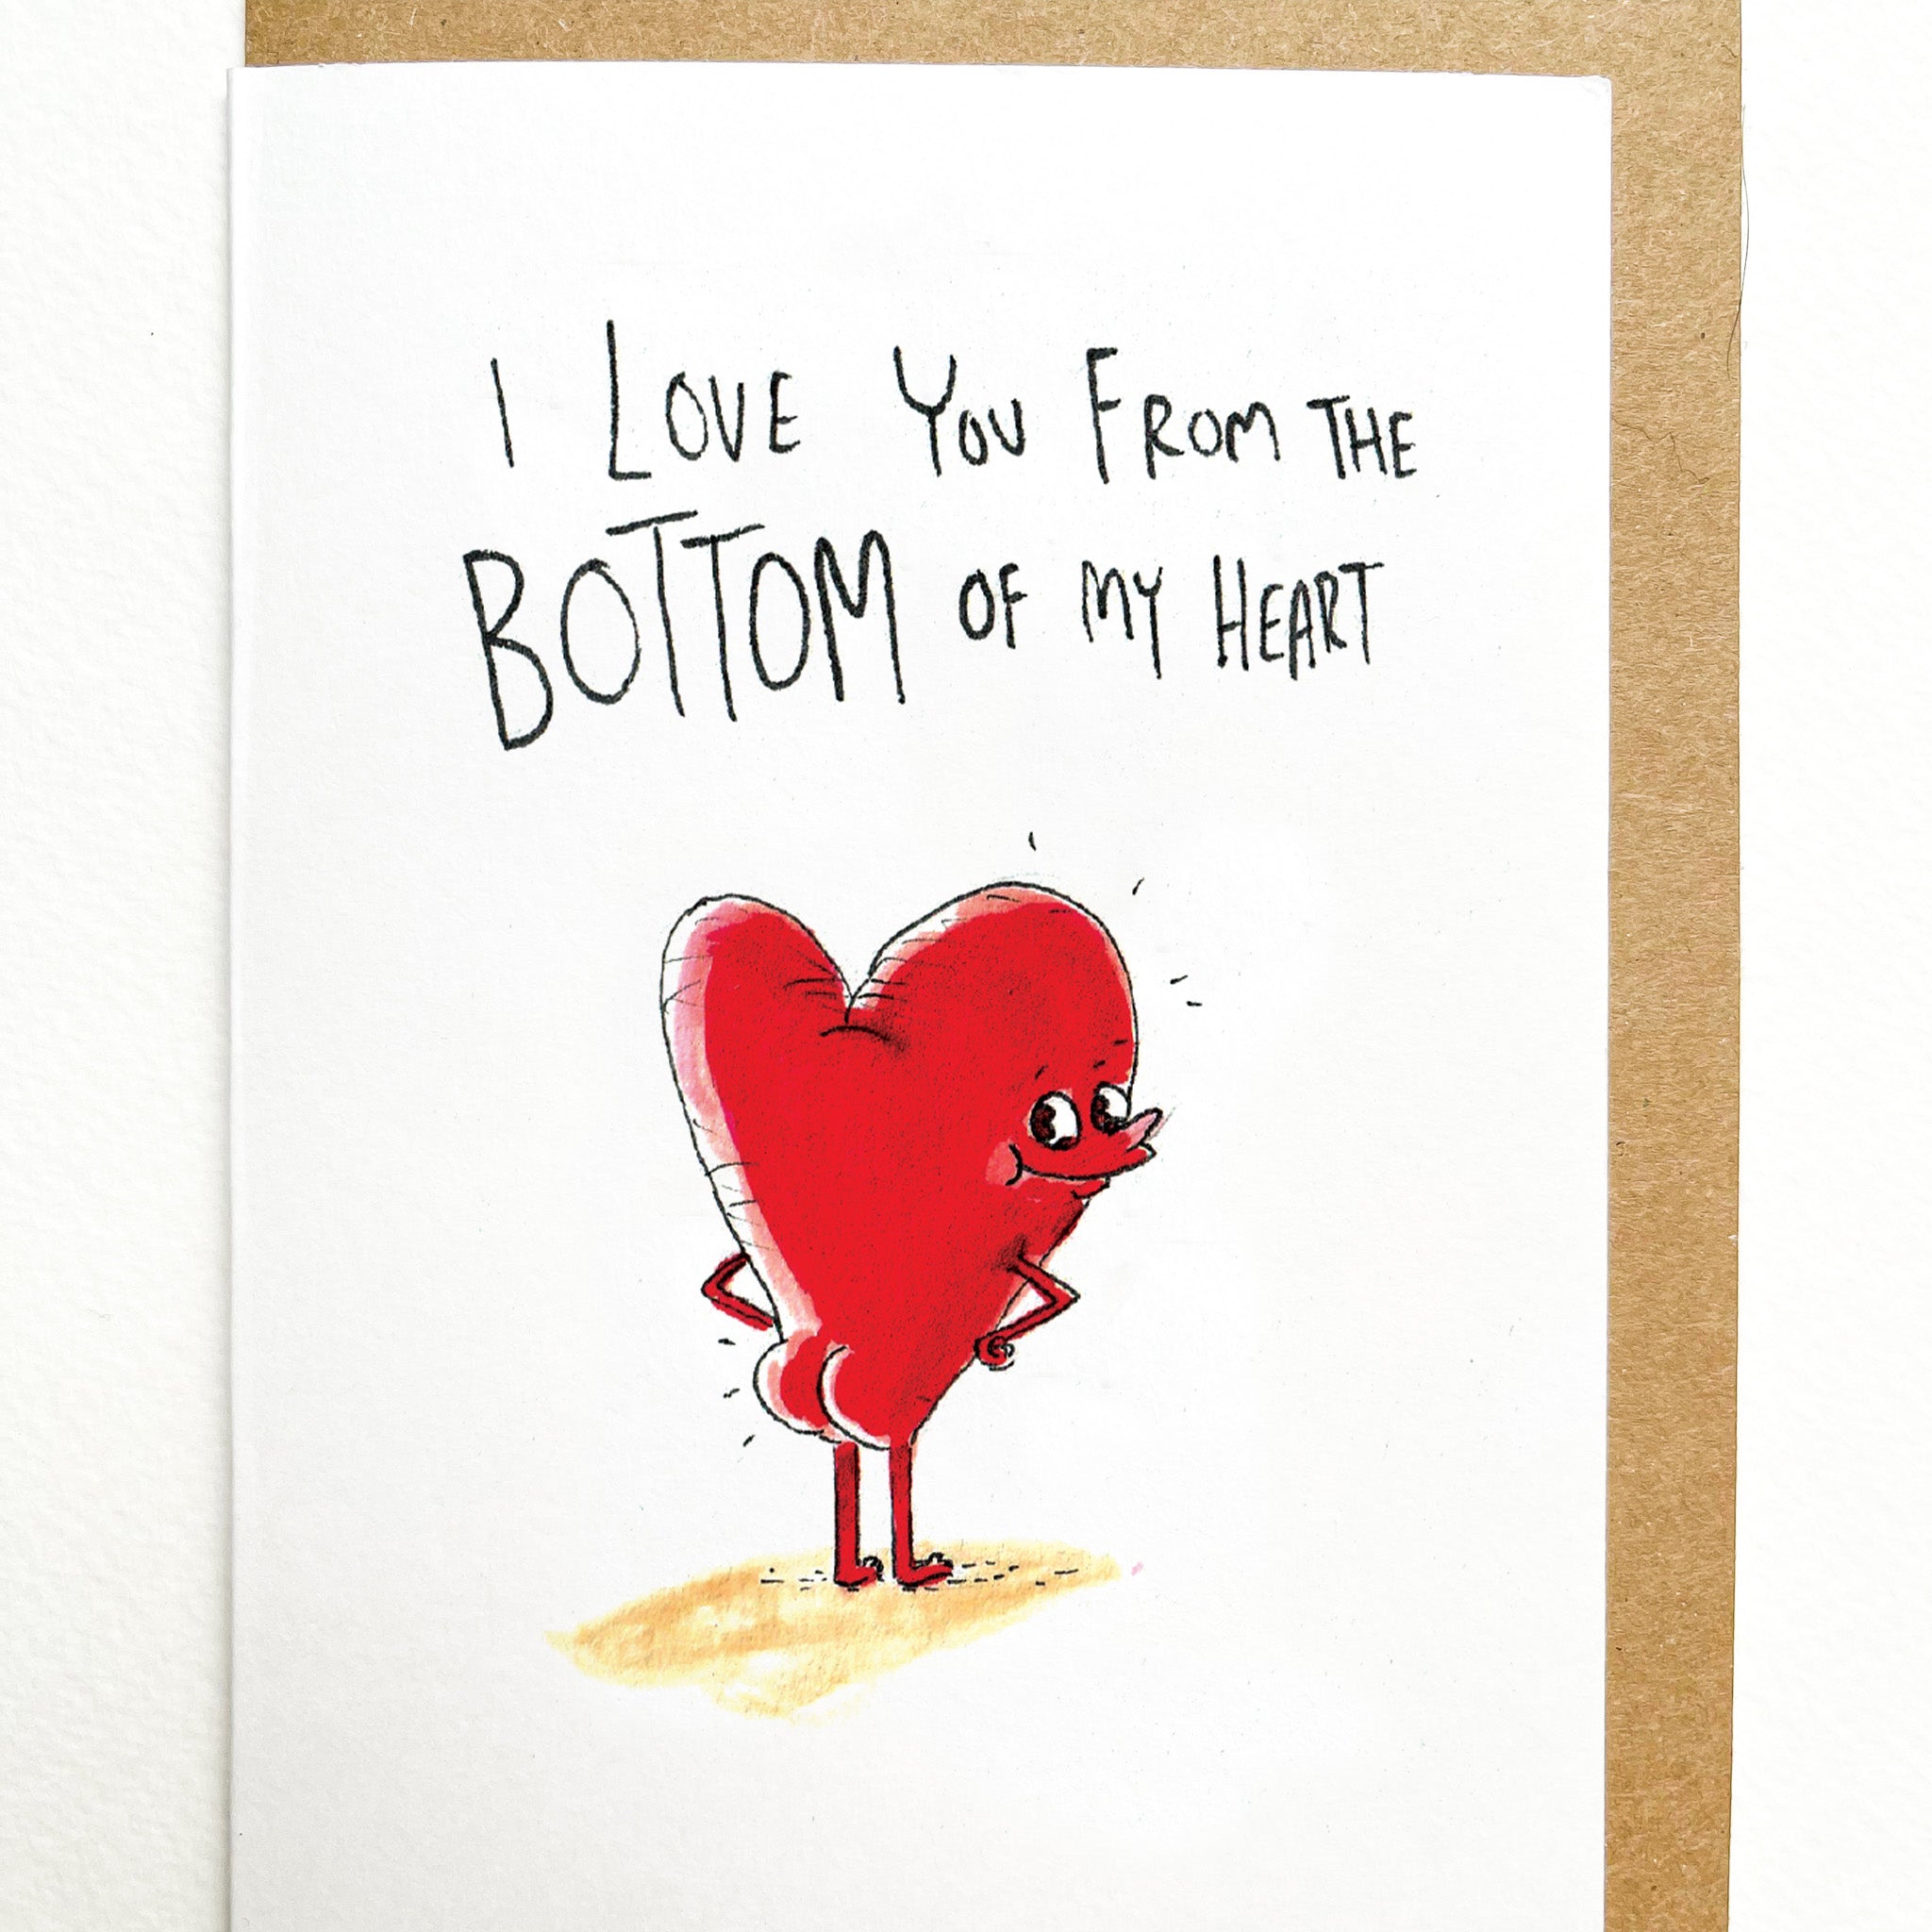 I Love You From The Bottom of My Heart – Well Drawn